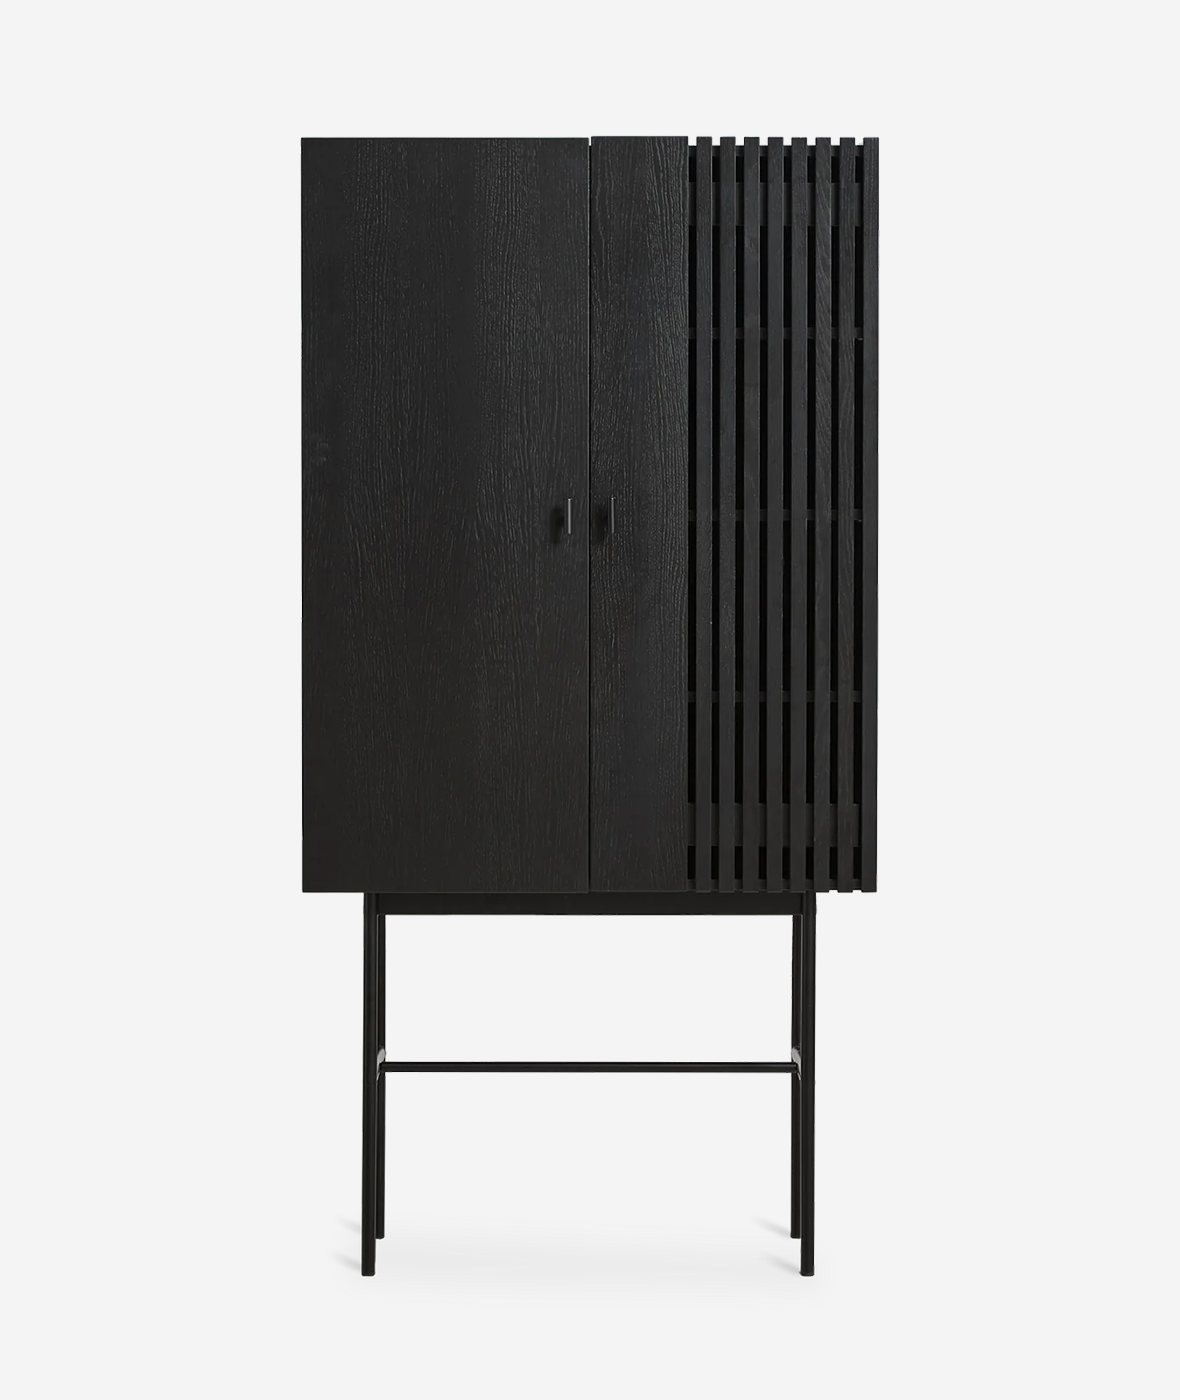 Array Highboard - More Options